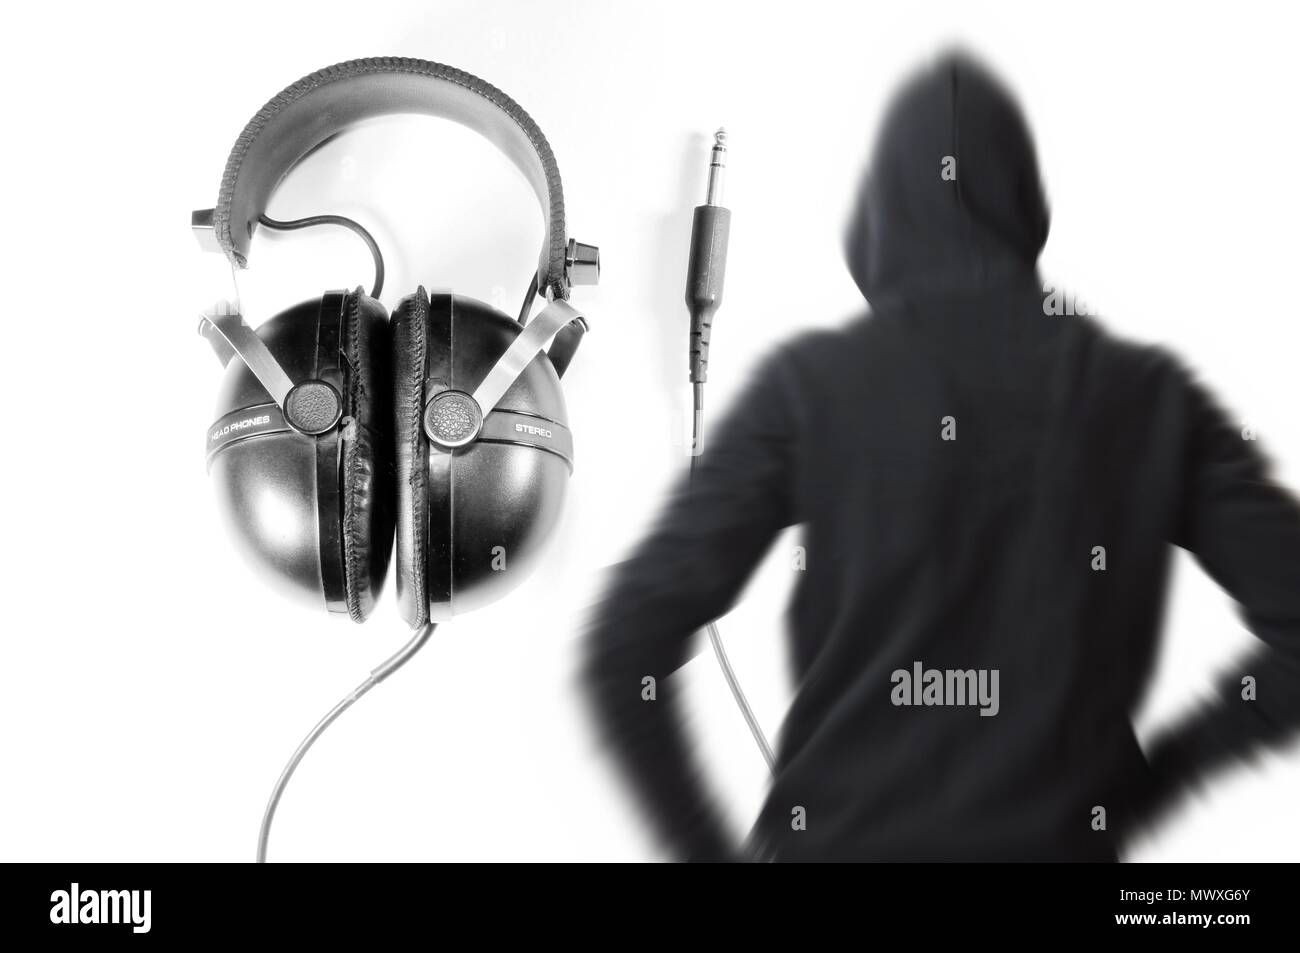 Headphone in background and black and white blurred vintage silhouette of young man with hooded sweatshirt. Dj concept. Stock Photo